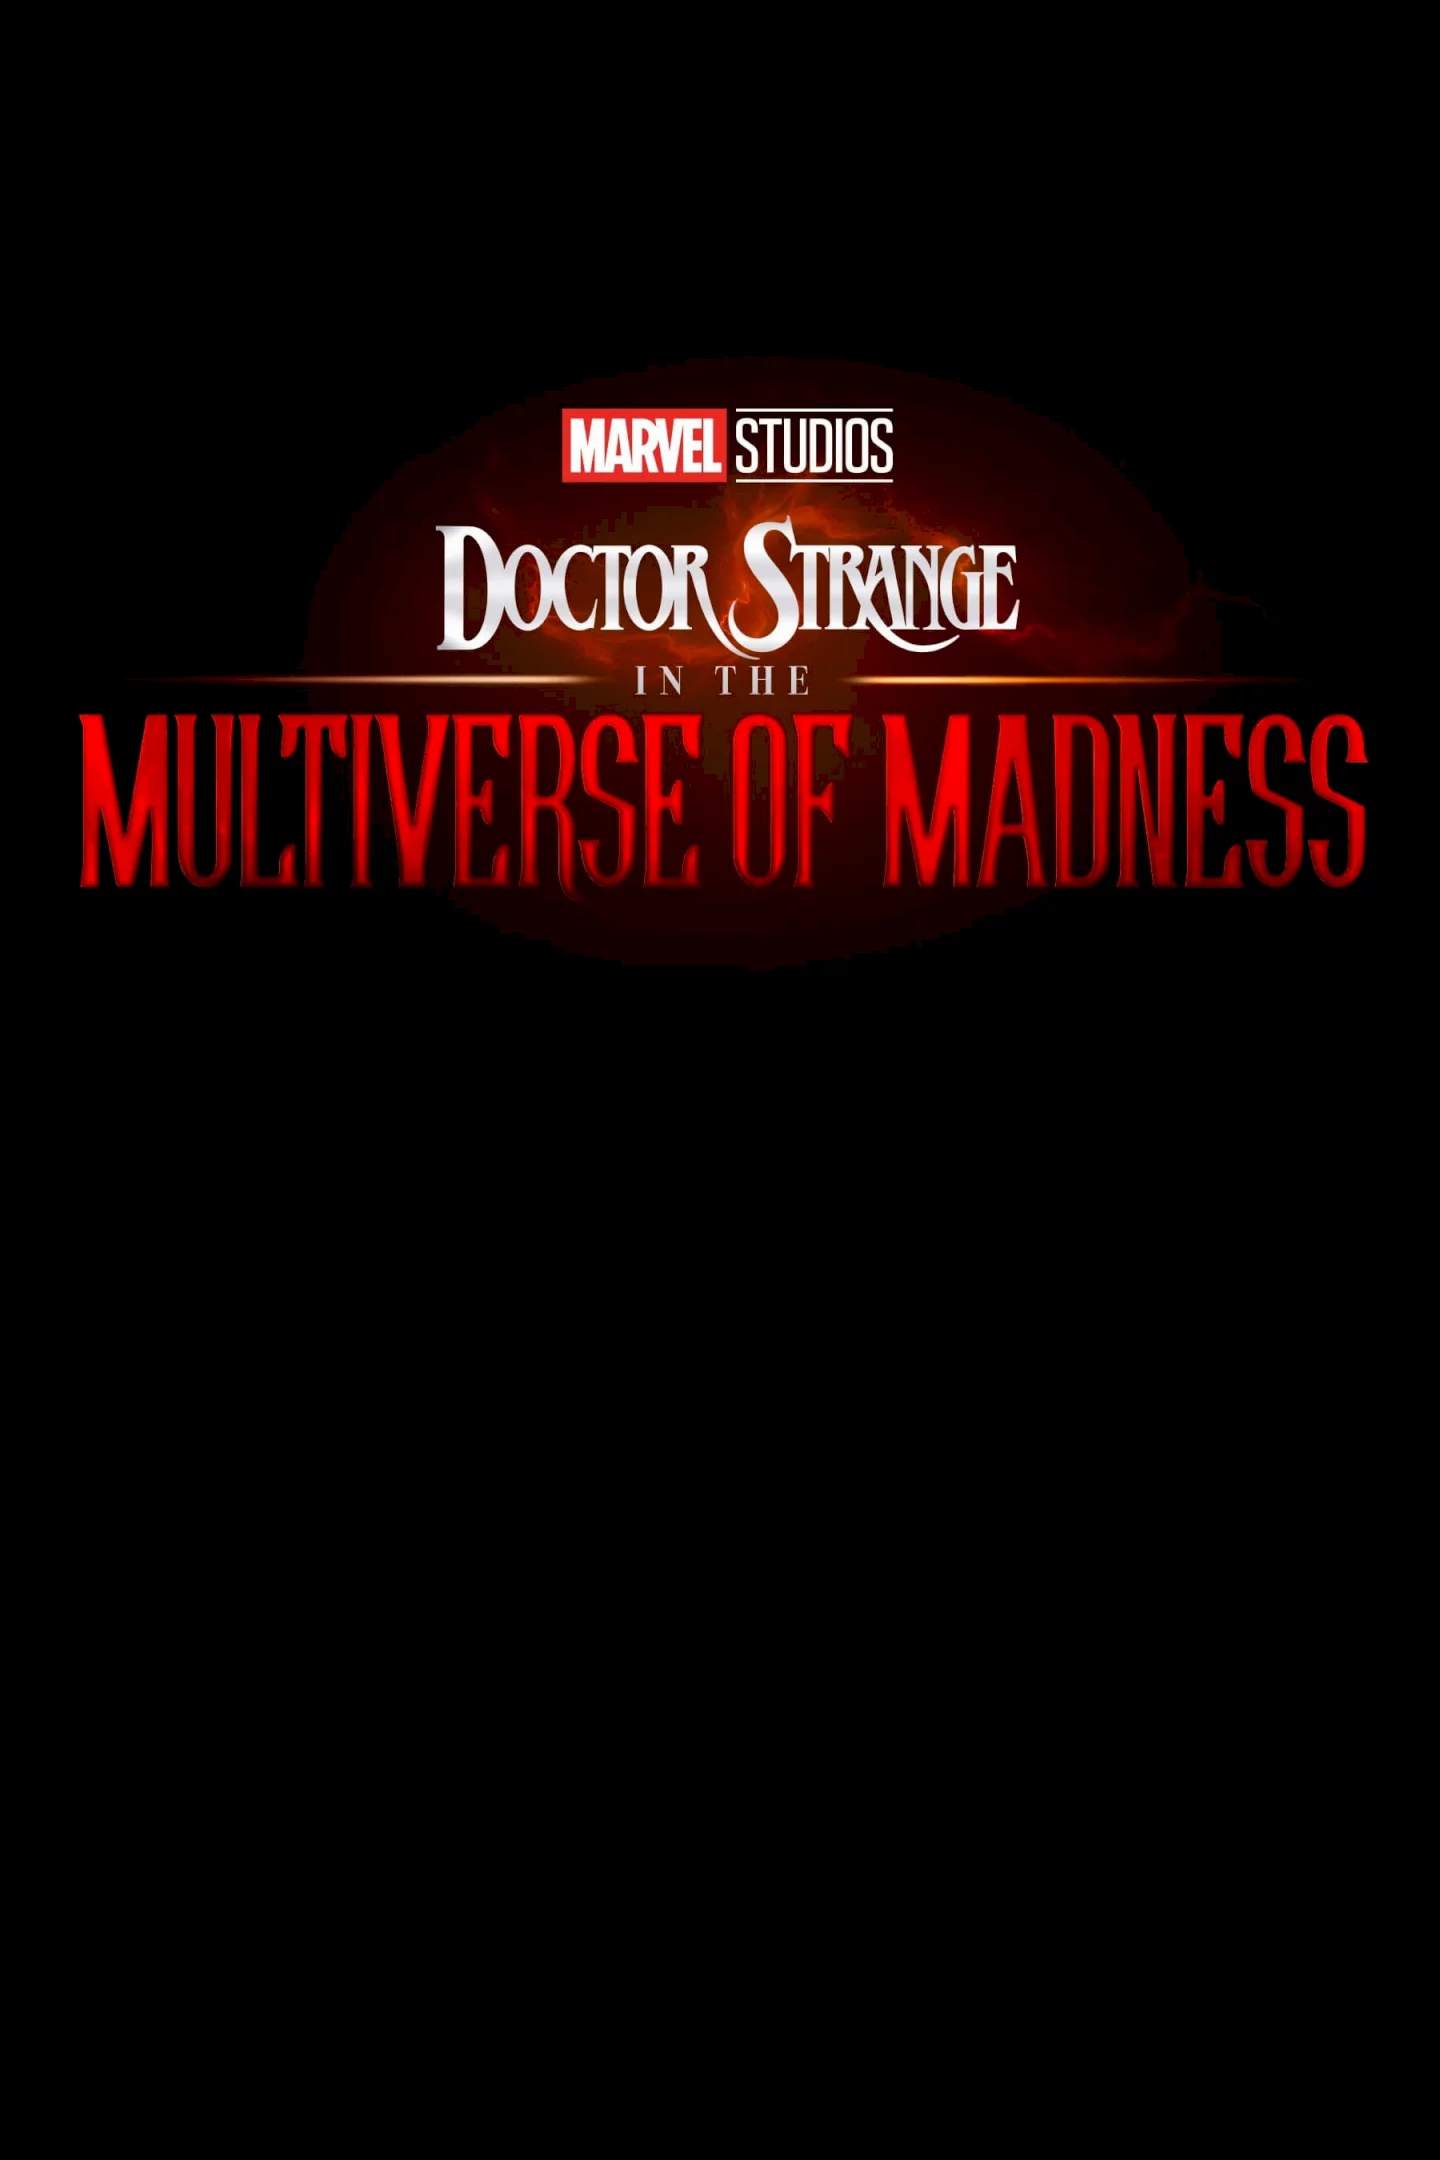 Photo 3 du film : Doctor Strange in the Multiverse of Madness